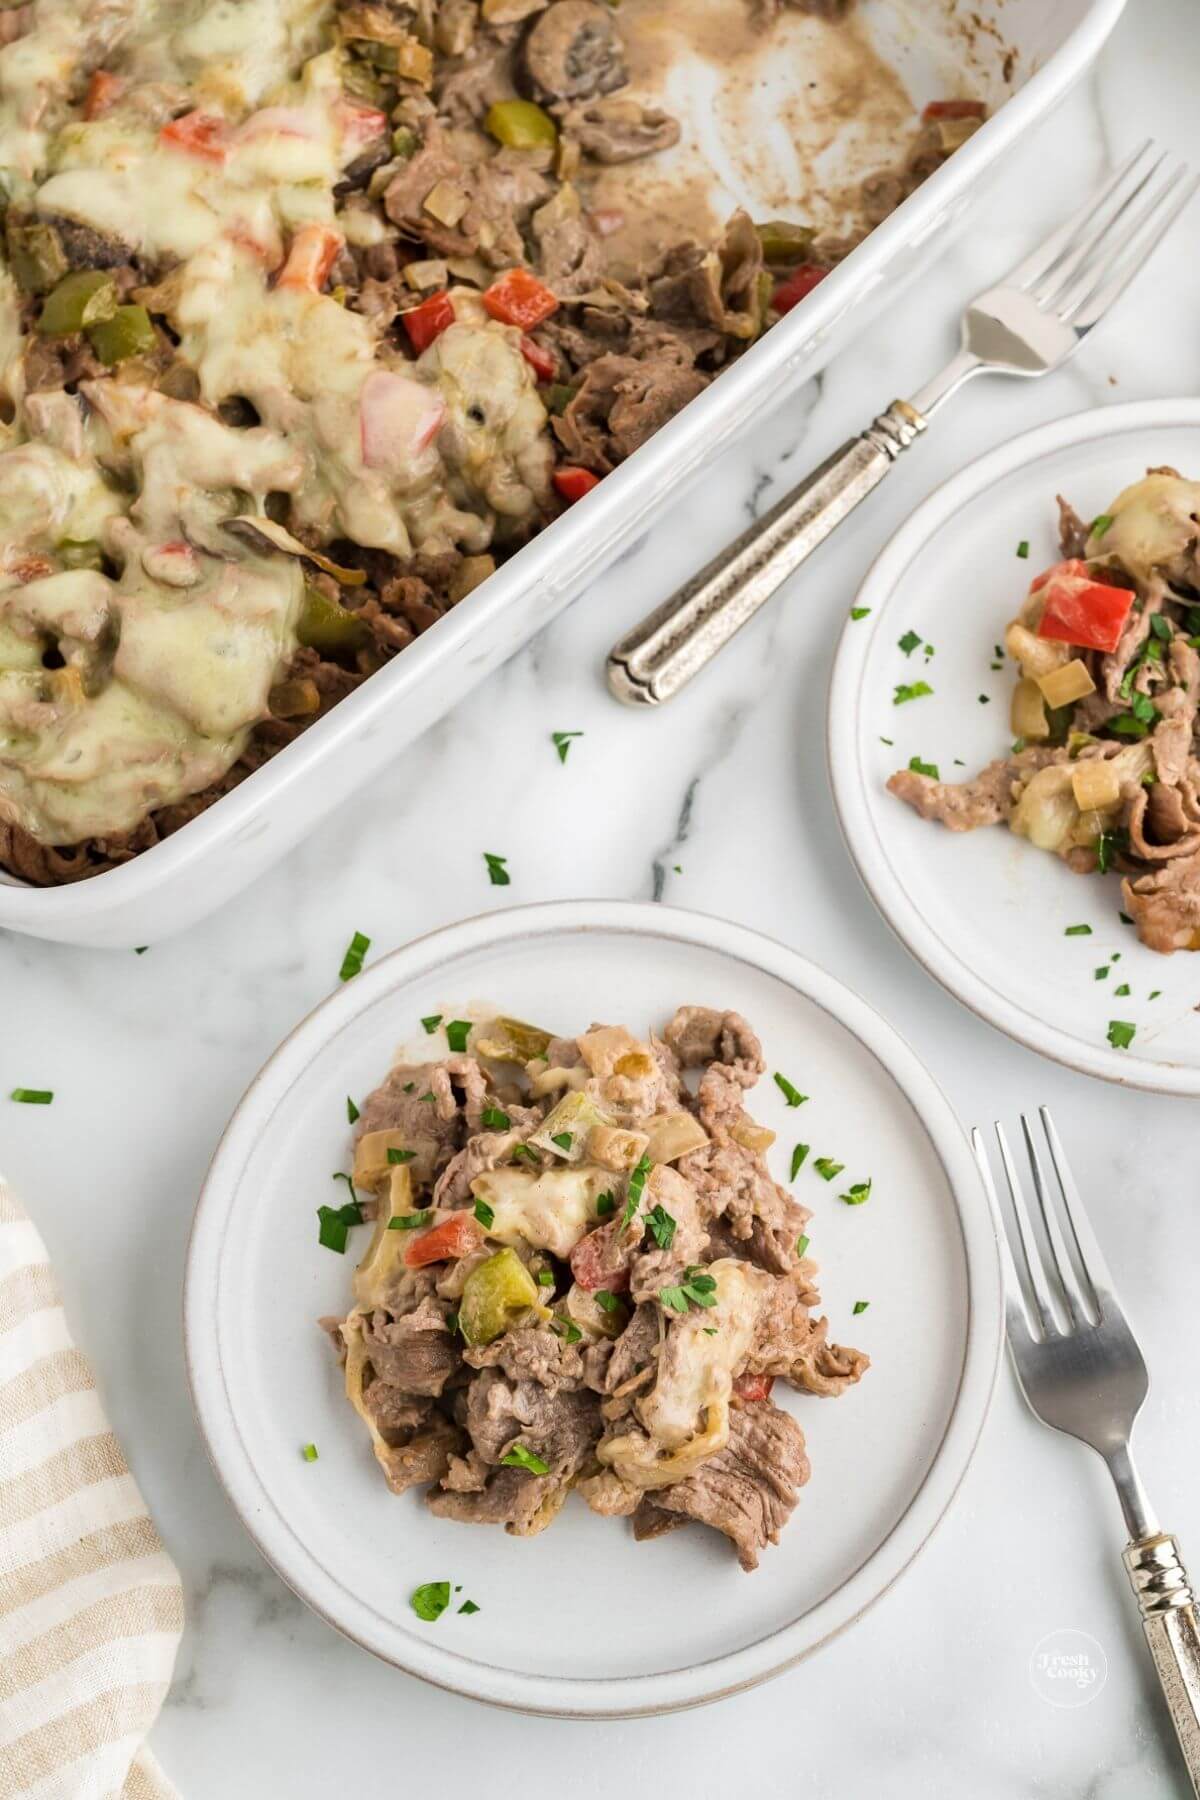 Servings of low carb Philly cheesesteak casserole on a plate with casserole dish behind.